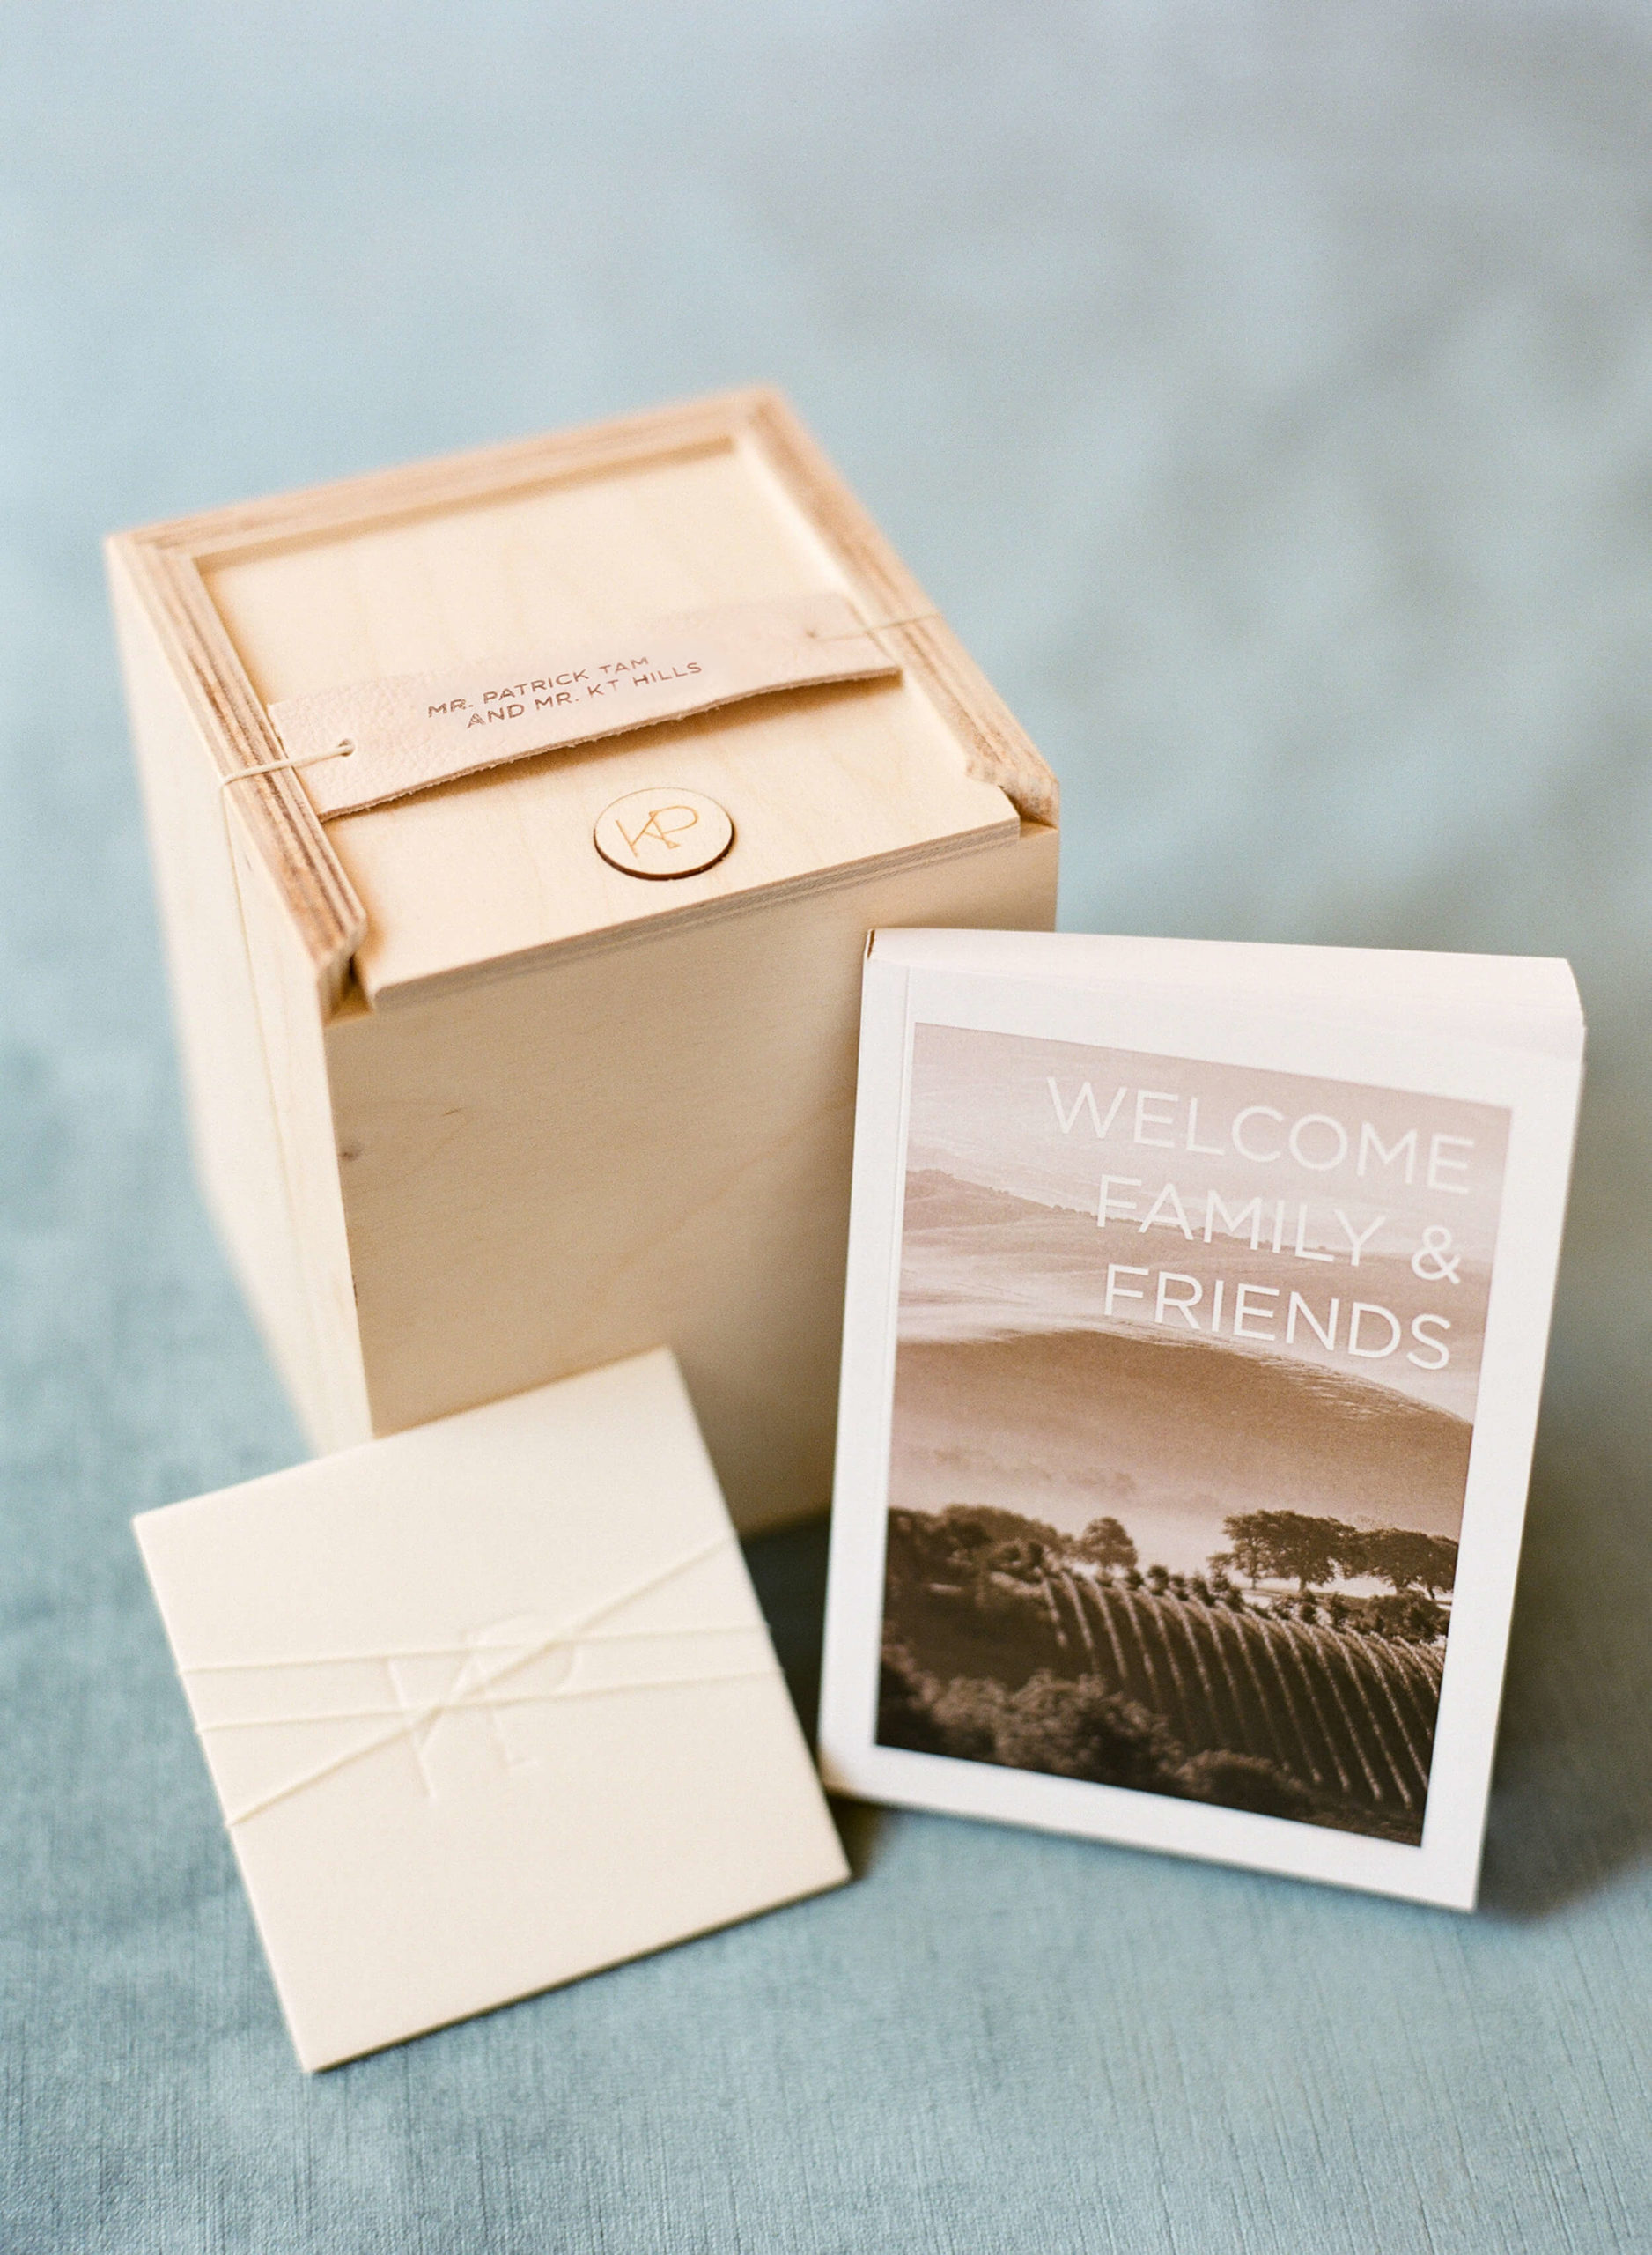 wedding welcome gift box and itinerary